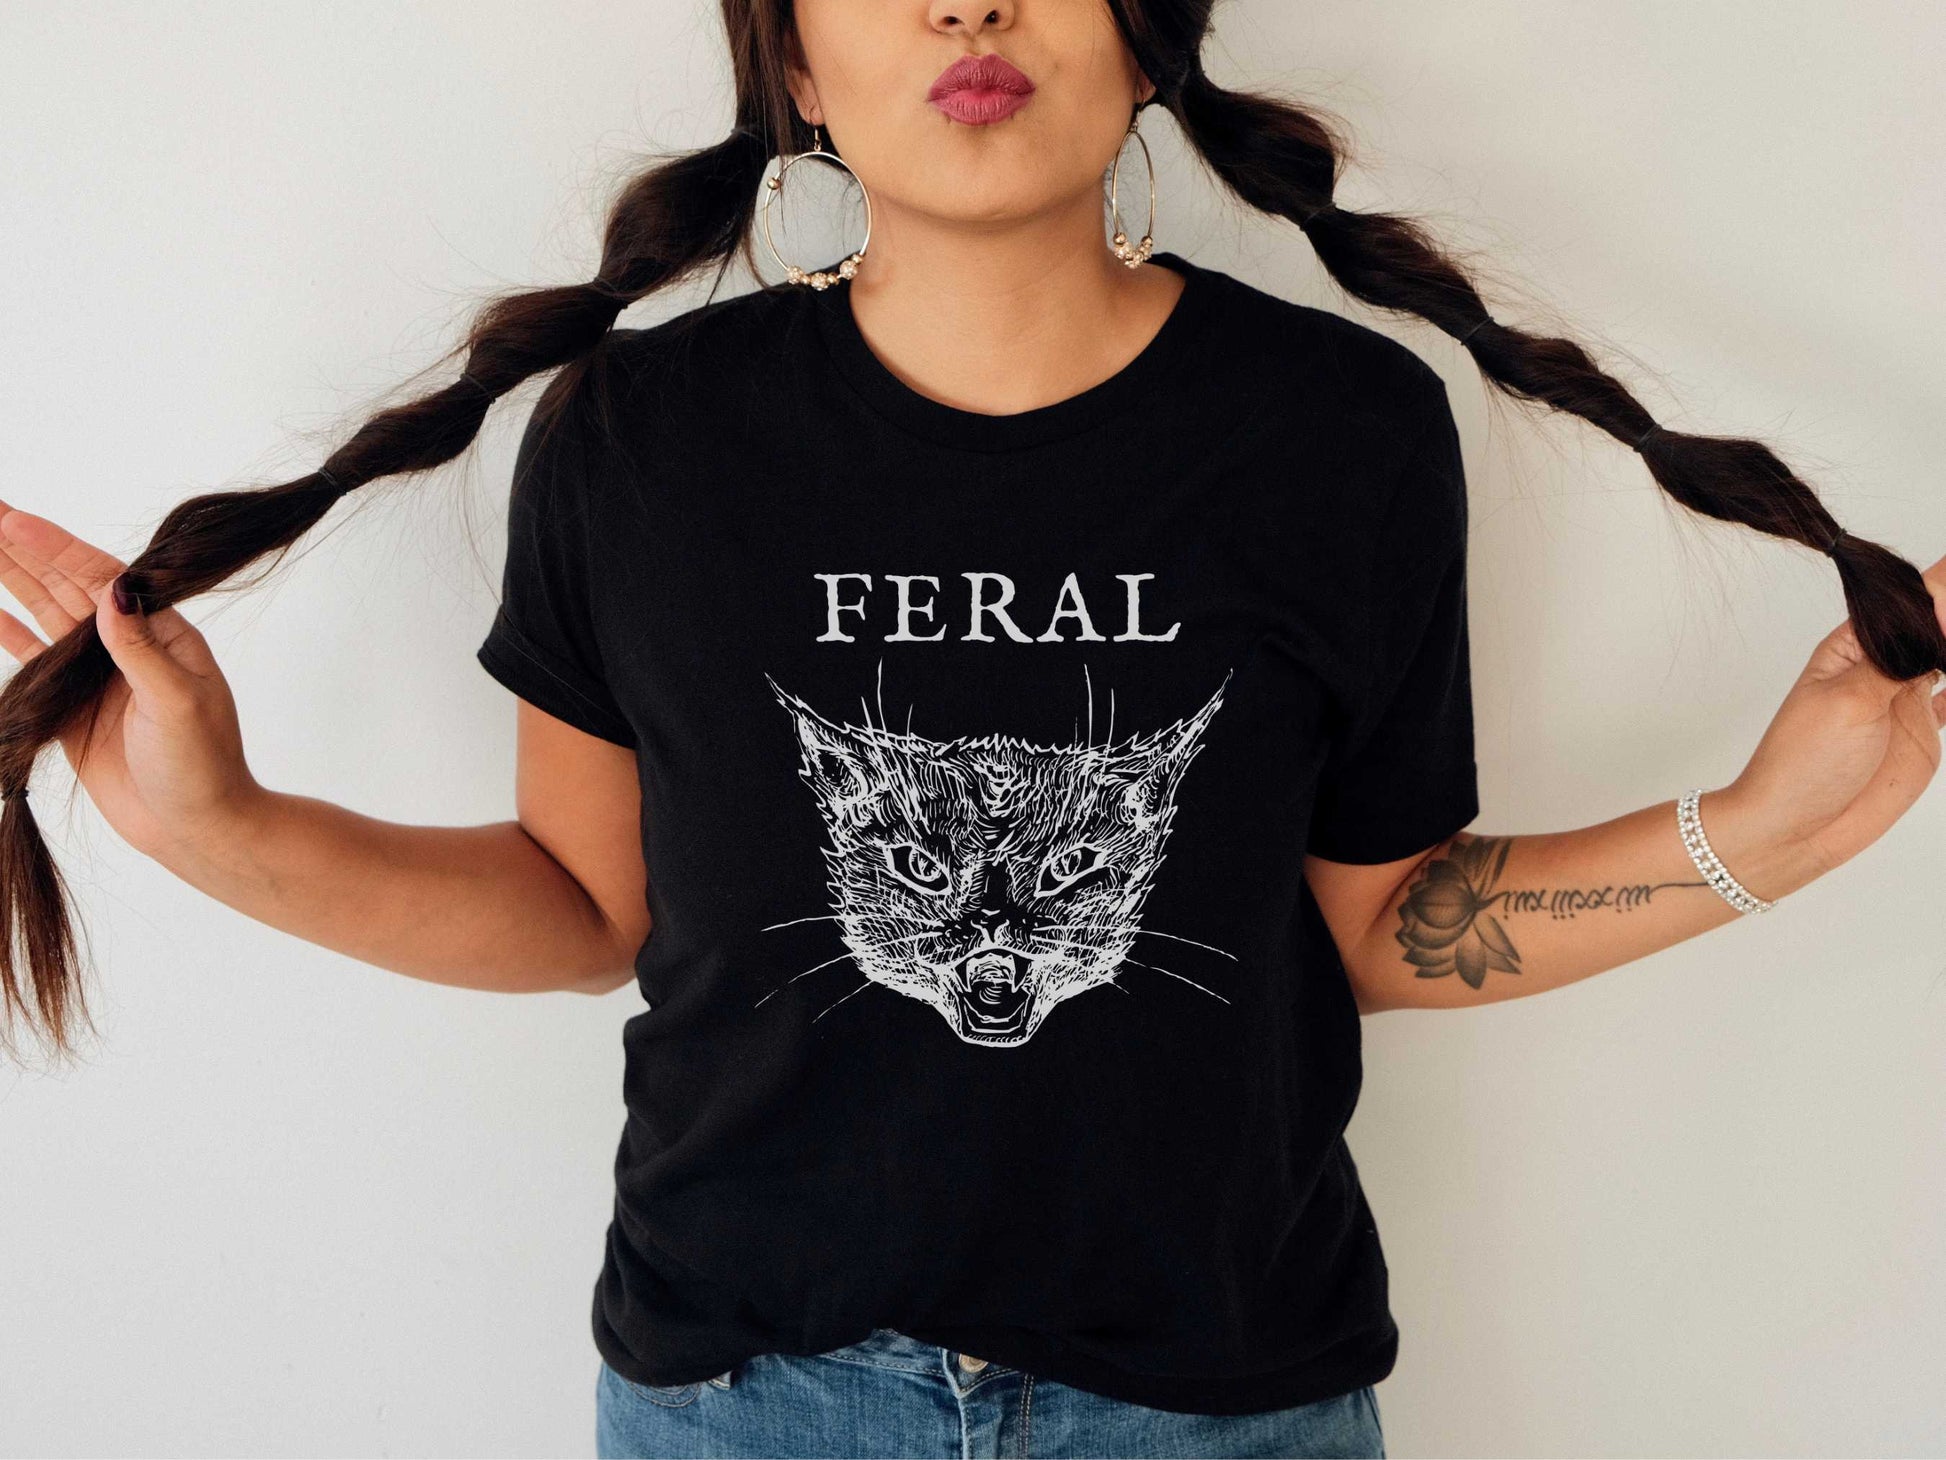 Feral T-Shirt in Black